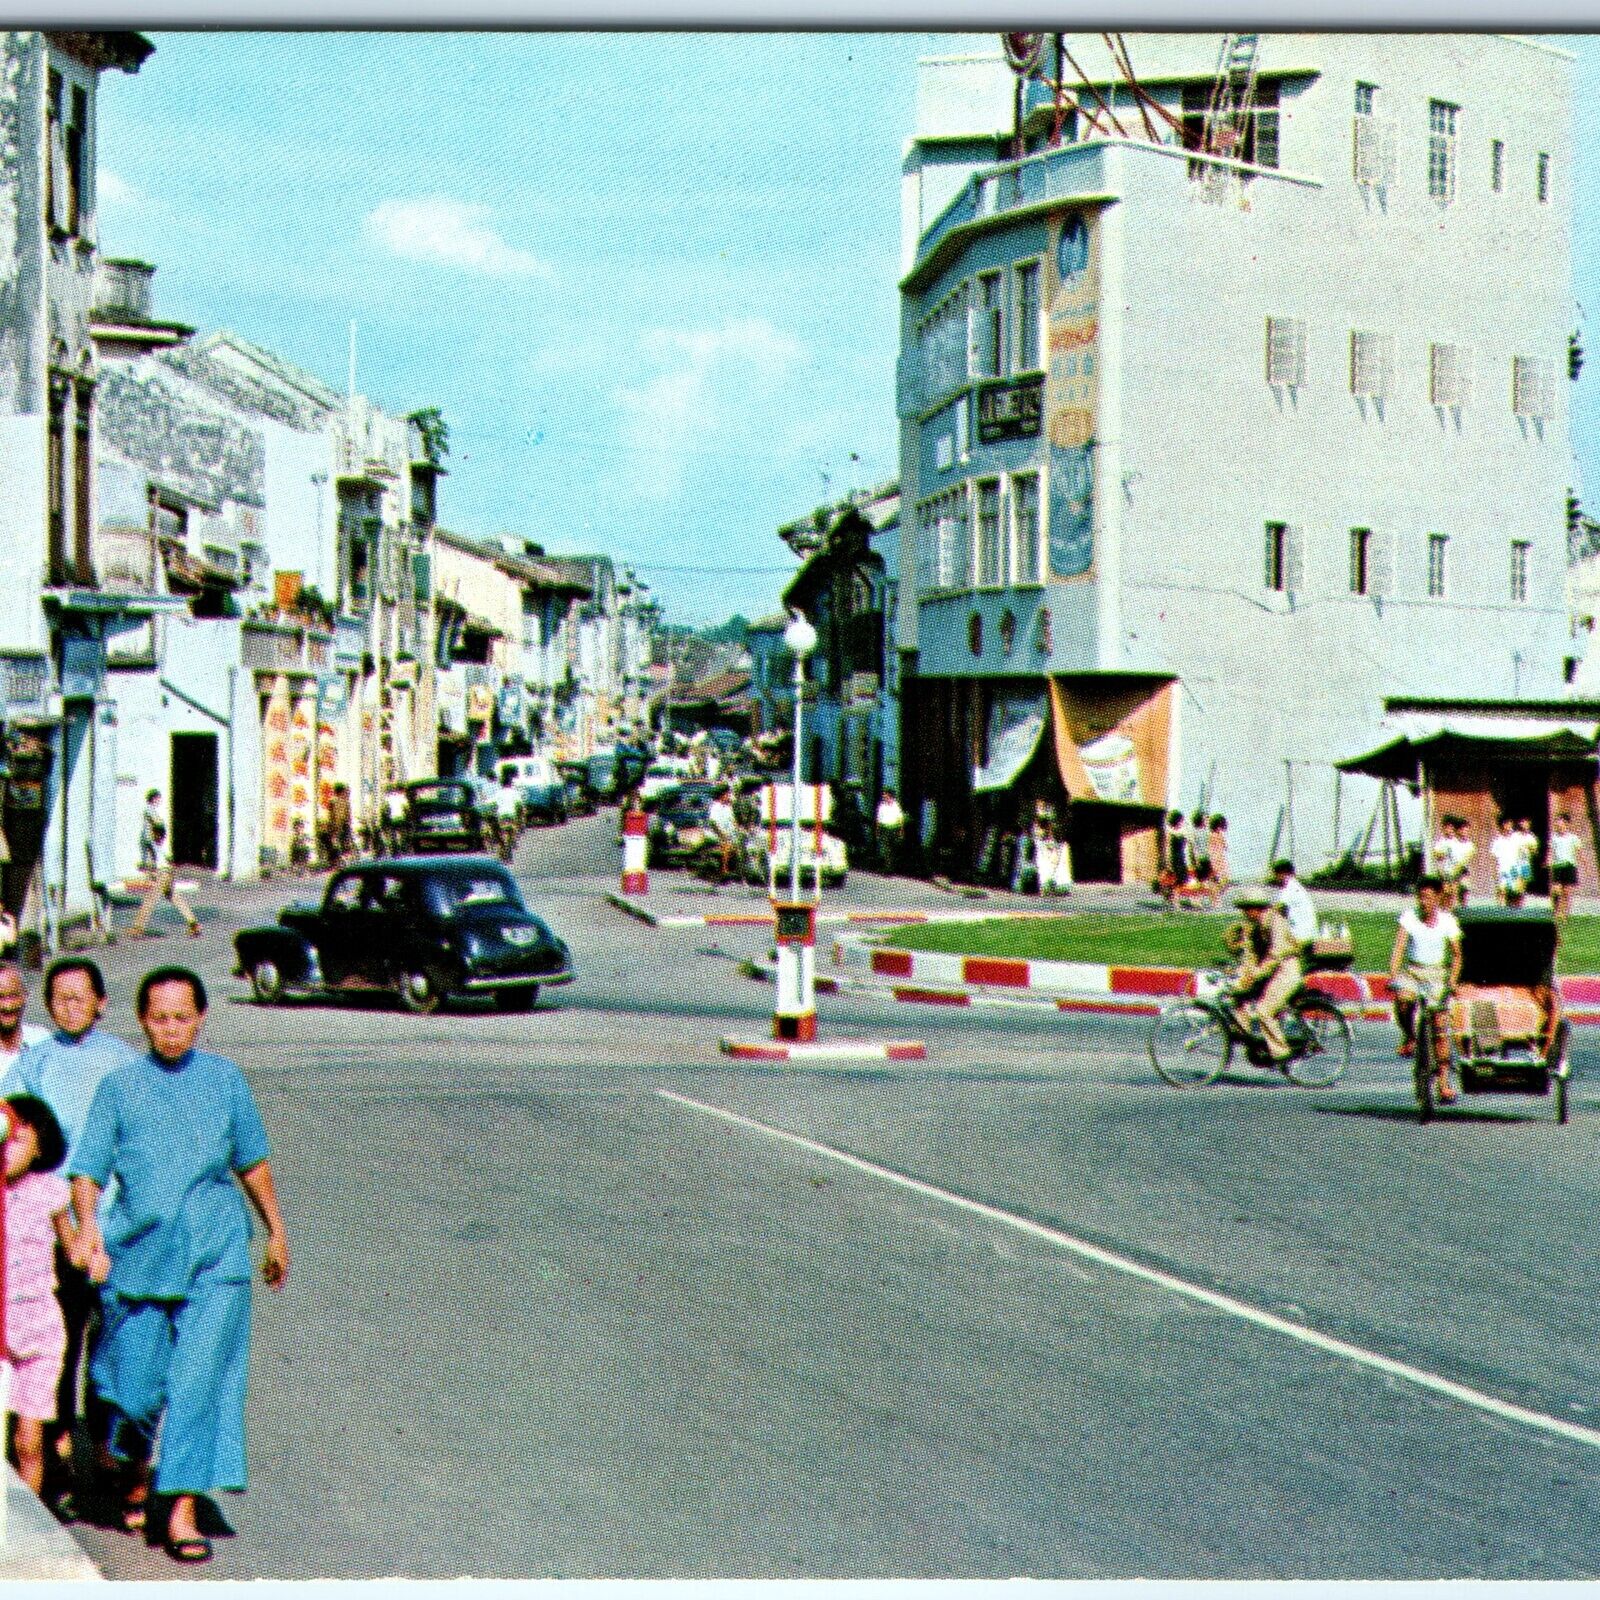 c1960s Malacca Singapore Street Scene PC Downtown Busy City Crowd Store Car A231